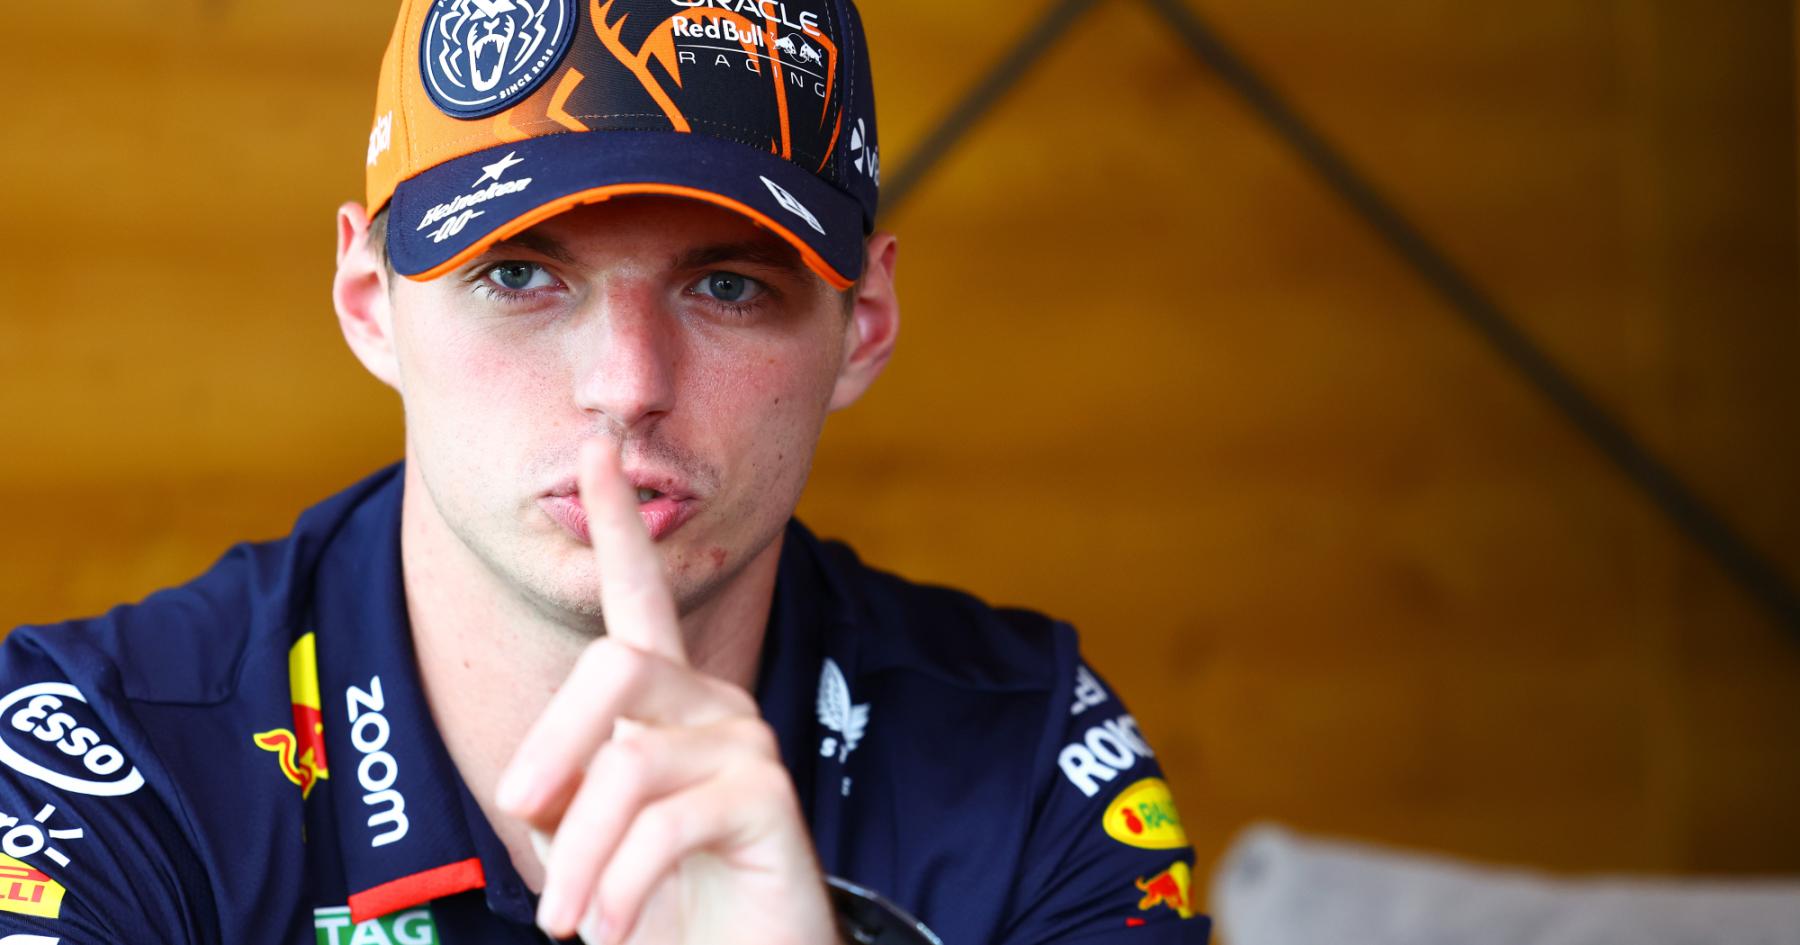 Verstappen tells F1 fans what to do 'if you don't like my bad language'